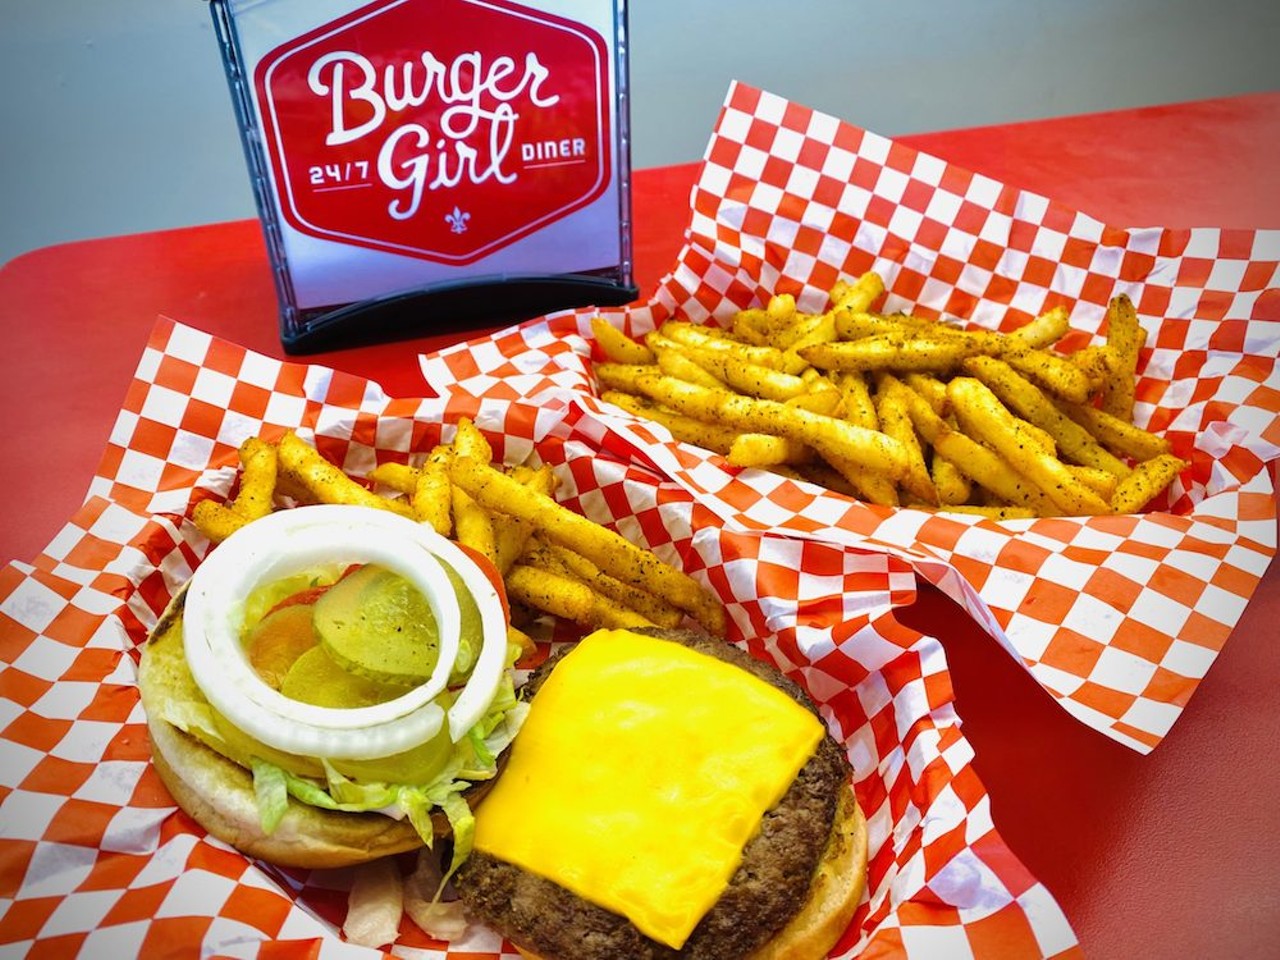 Burger Boy Diner
Burger Boy Burger
Our signature fresh quarter pound 80/20 black angus patty, with your choice of cheese, fully dressed to your liking, with special sauce, on a toasted honey bun. Served with a small order of our perfectly seasoned fries.